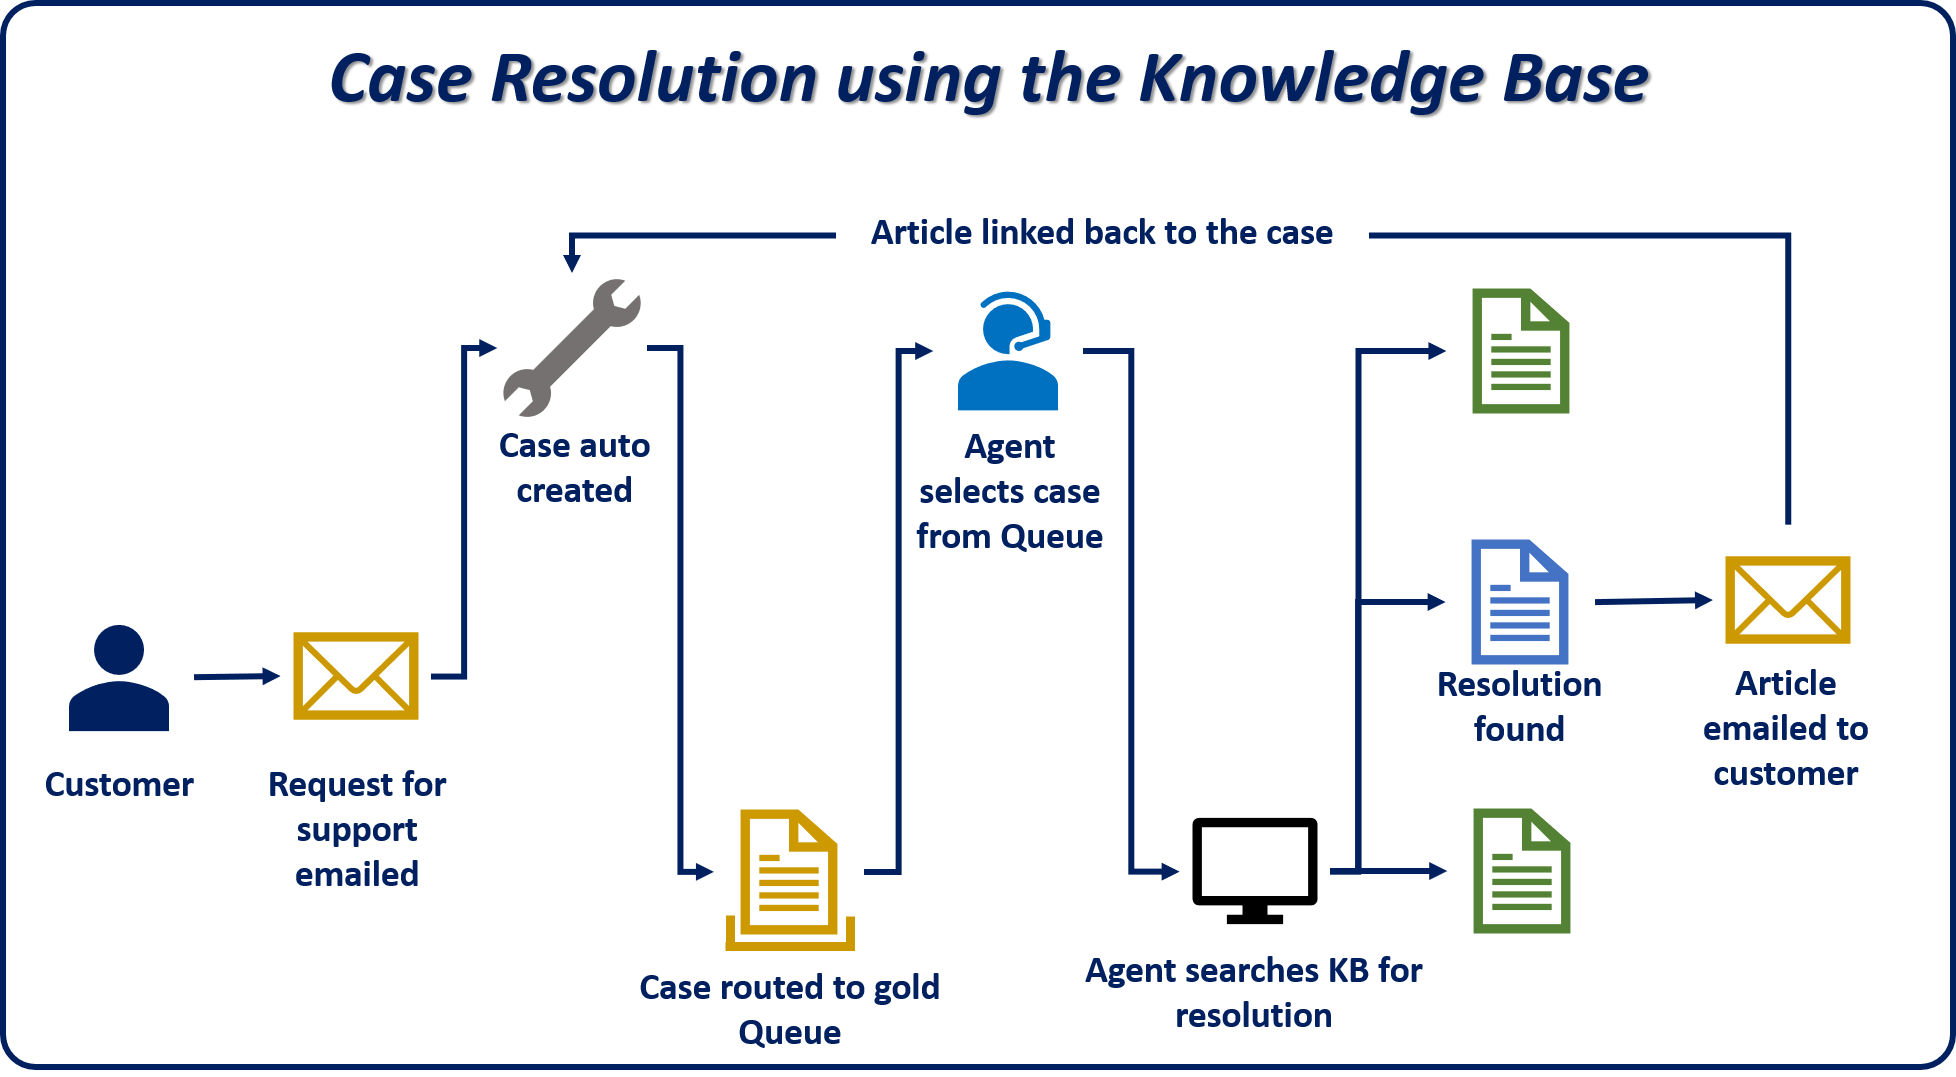 Case resolution by using the knowledge base